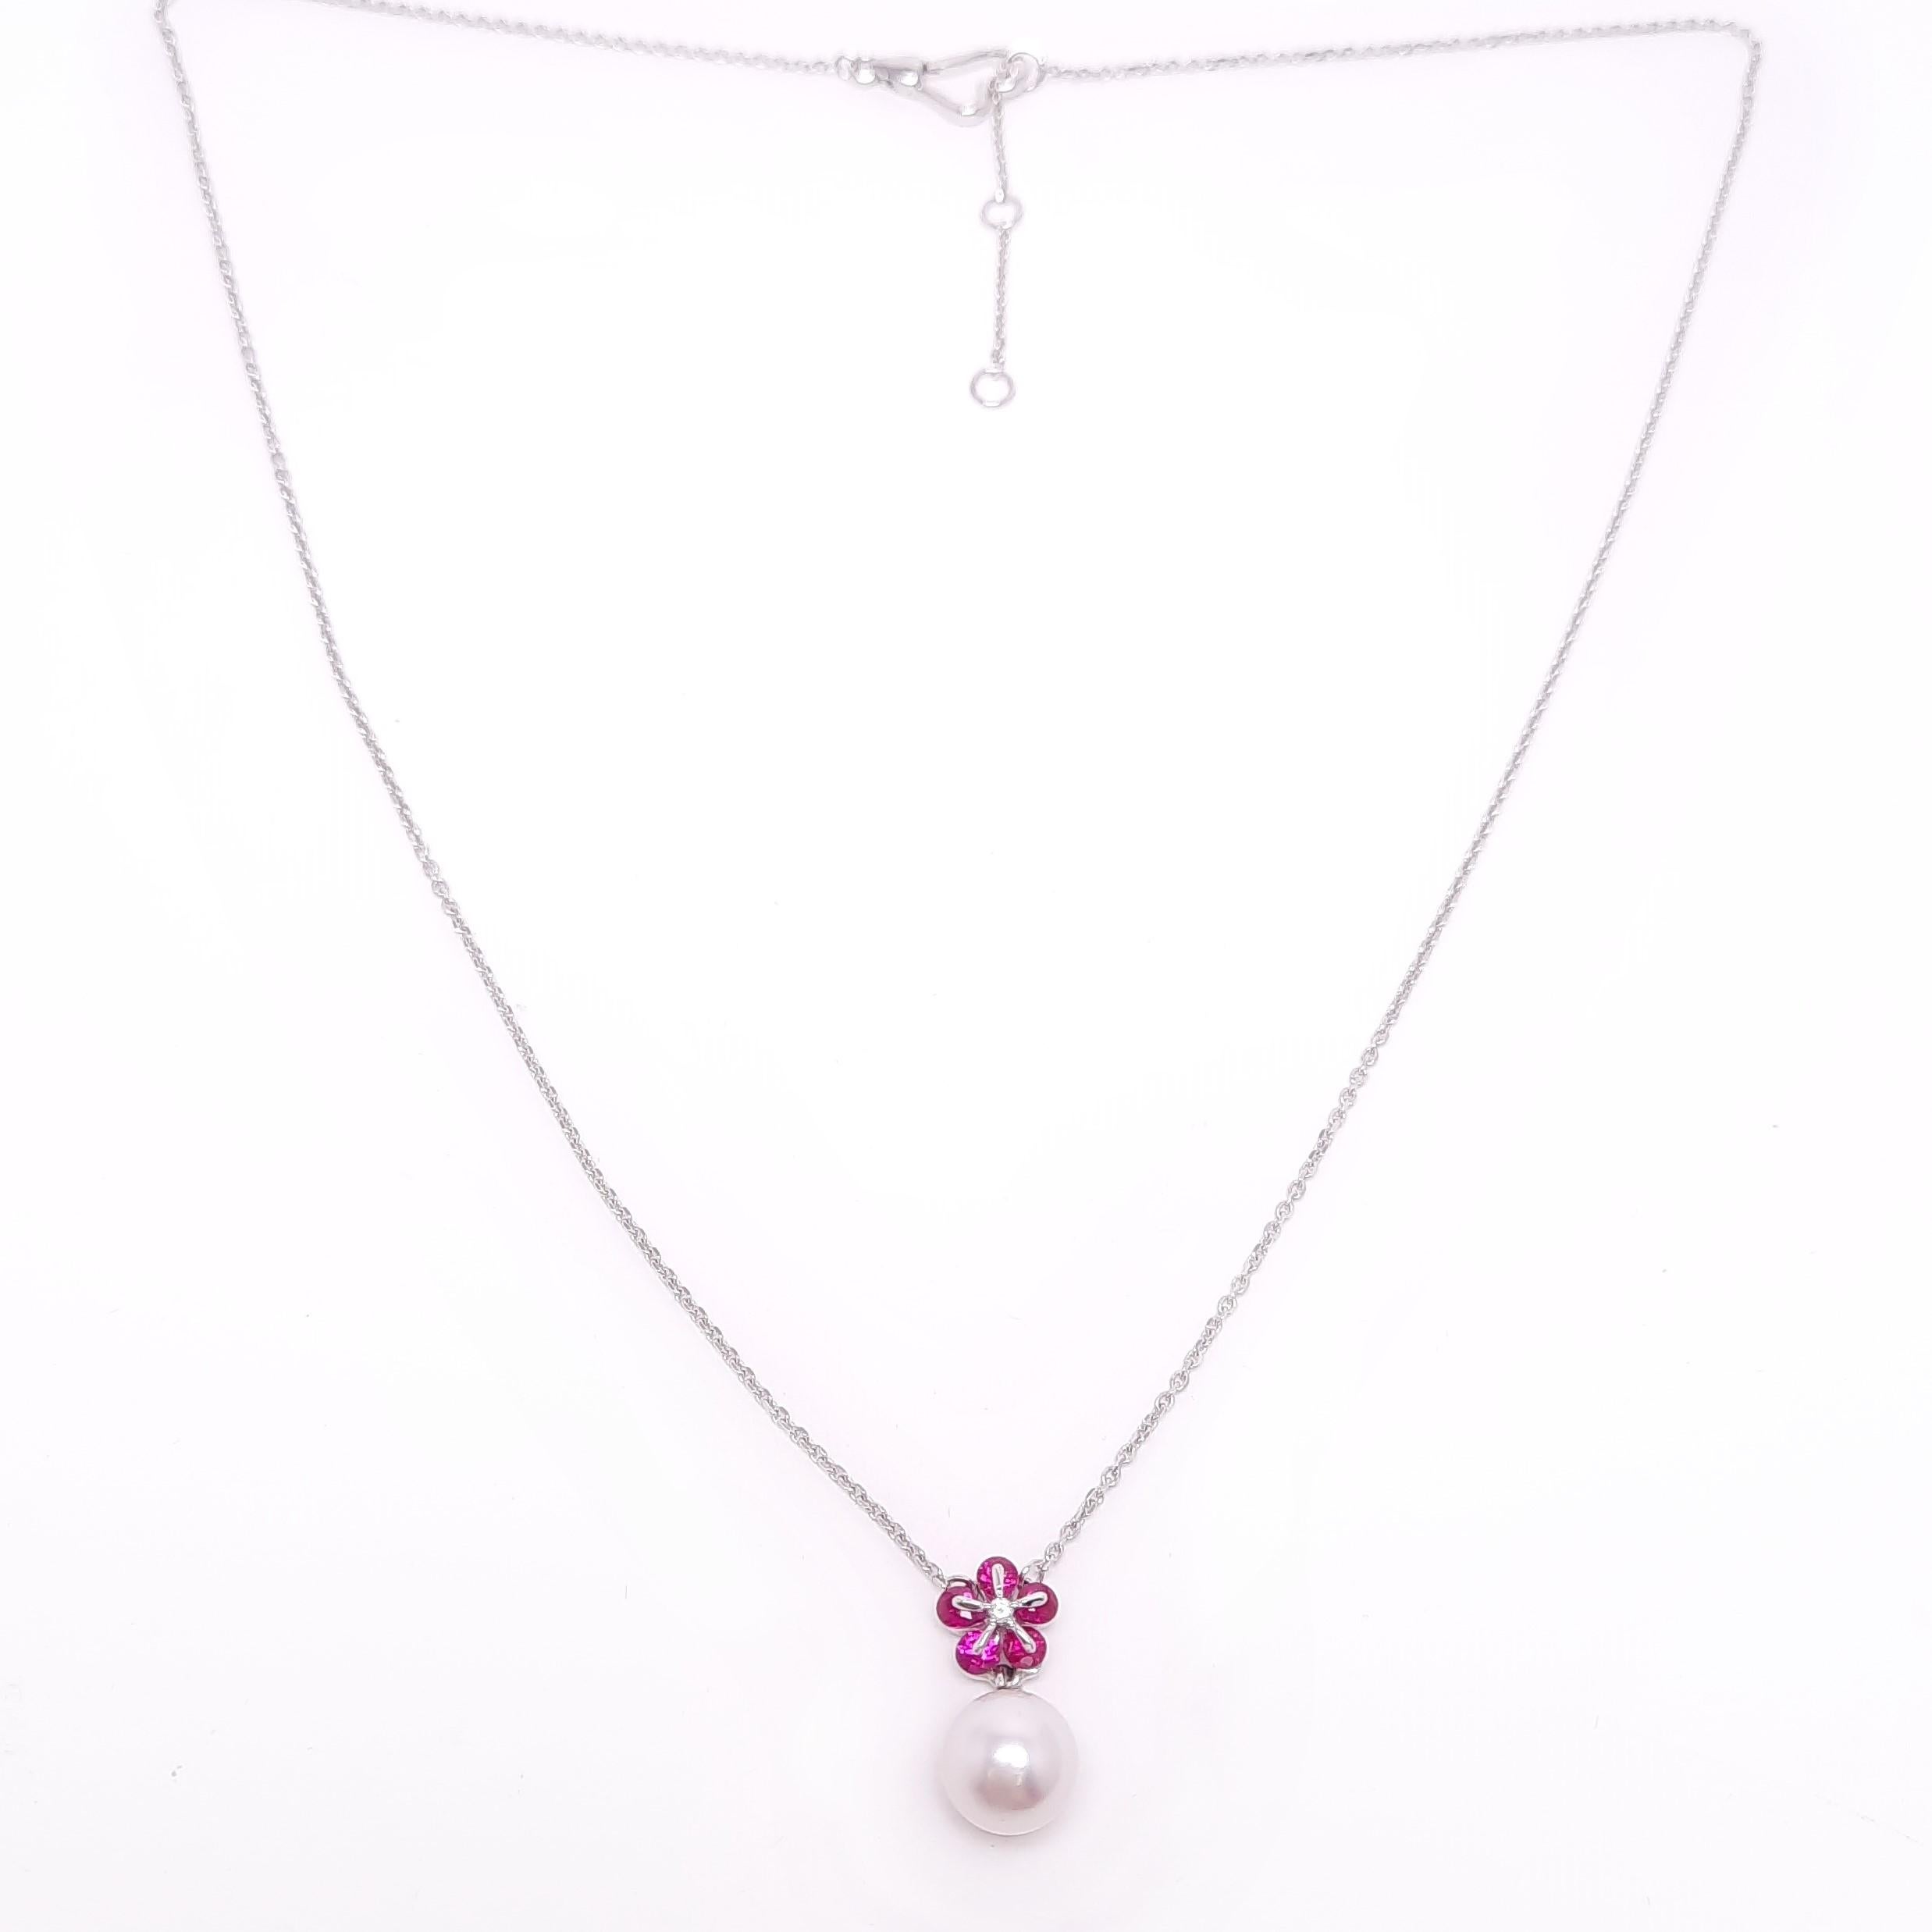 Pearls jewellery always suit any occasion.
This necklace is made of 18K white gold, pinkish 7-7.5mm Akoya pearl (AA grade+) from Japan, and diamond cut rubies mounted in the modern Russian setting 